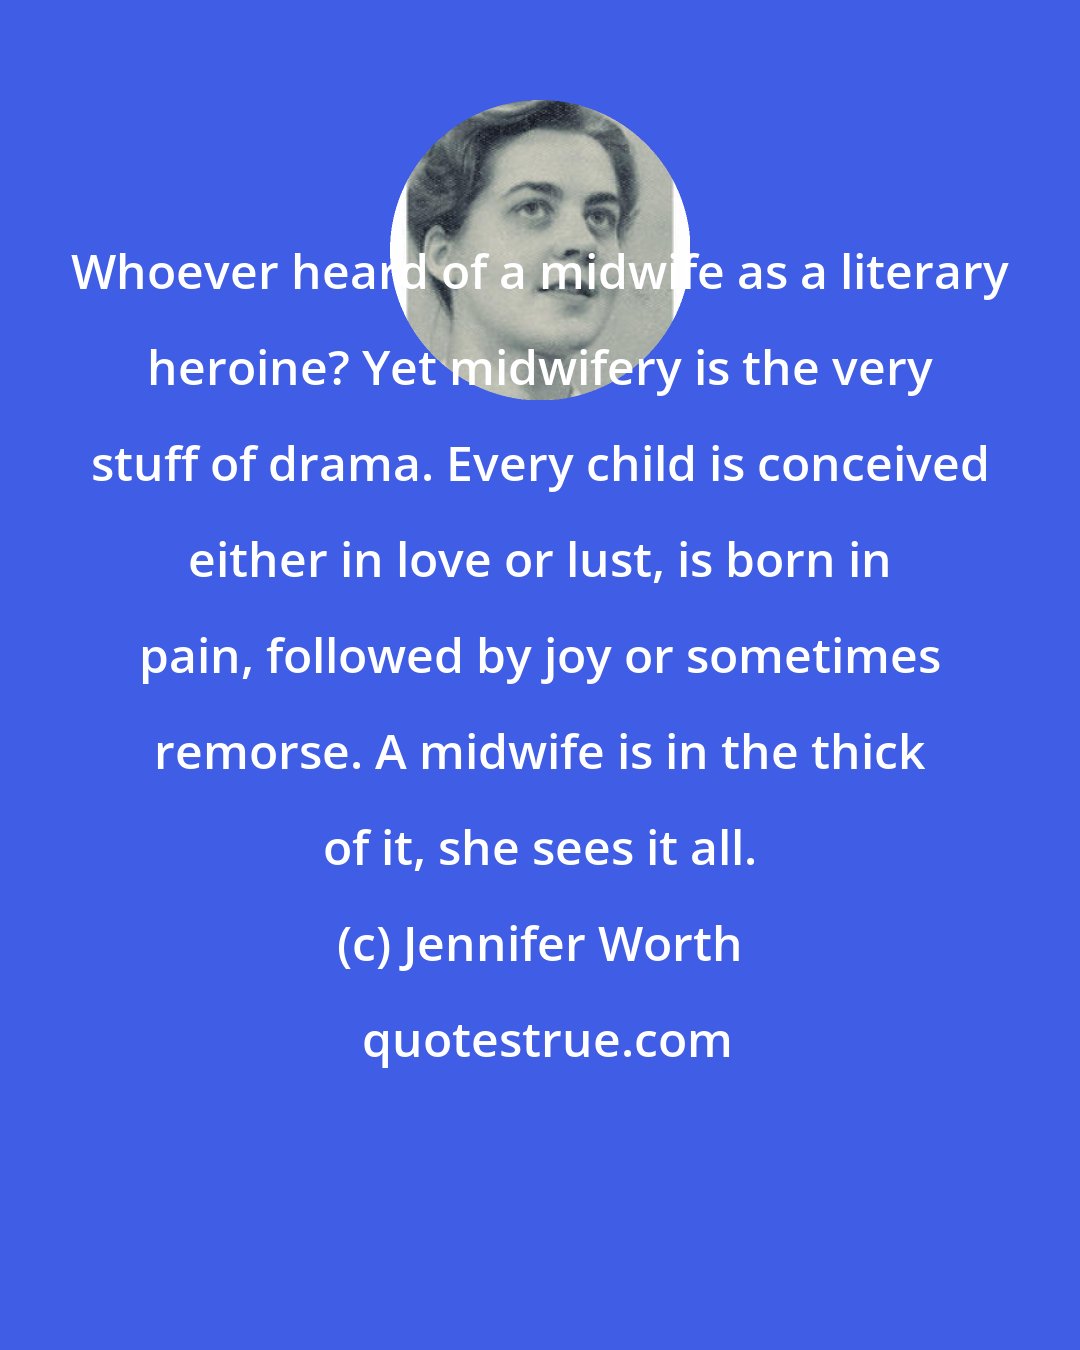 Jennifer Worth: Whoever heard of a midwife as a literary heroine? Yet midwifery is the very stuff of drama. Every child is conceived either in love or lust, is born in pain, followed by joy or sometimes remorse. A midwife is in the thick of it, she sees it all.